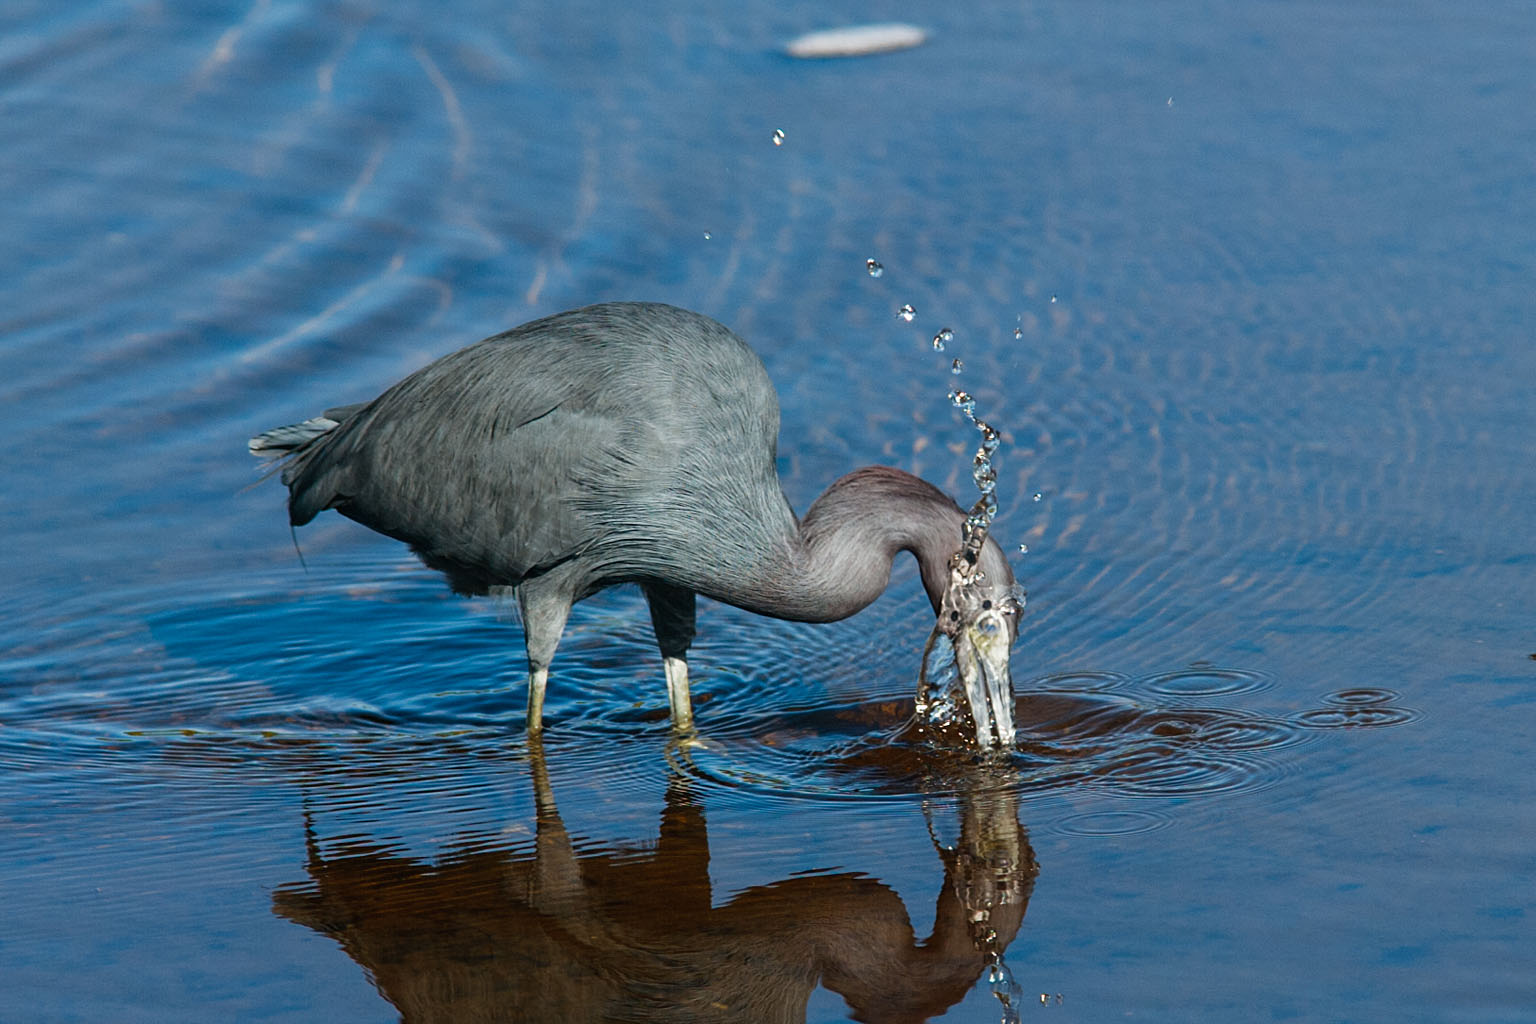 A heron knifes through the water to snare a fish.  Click for next photo.